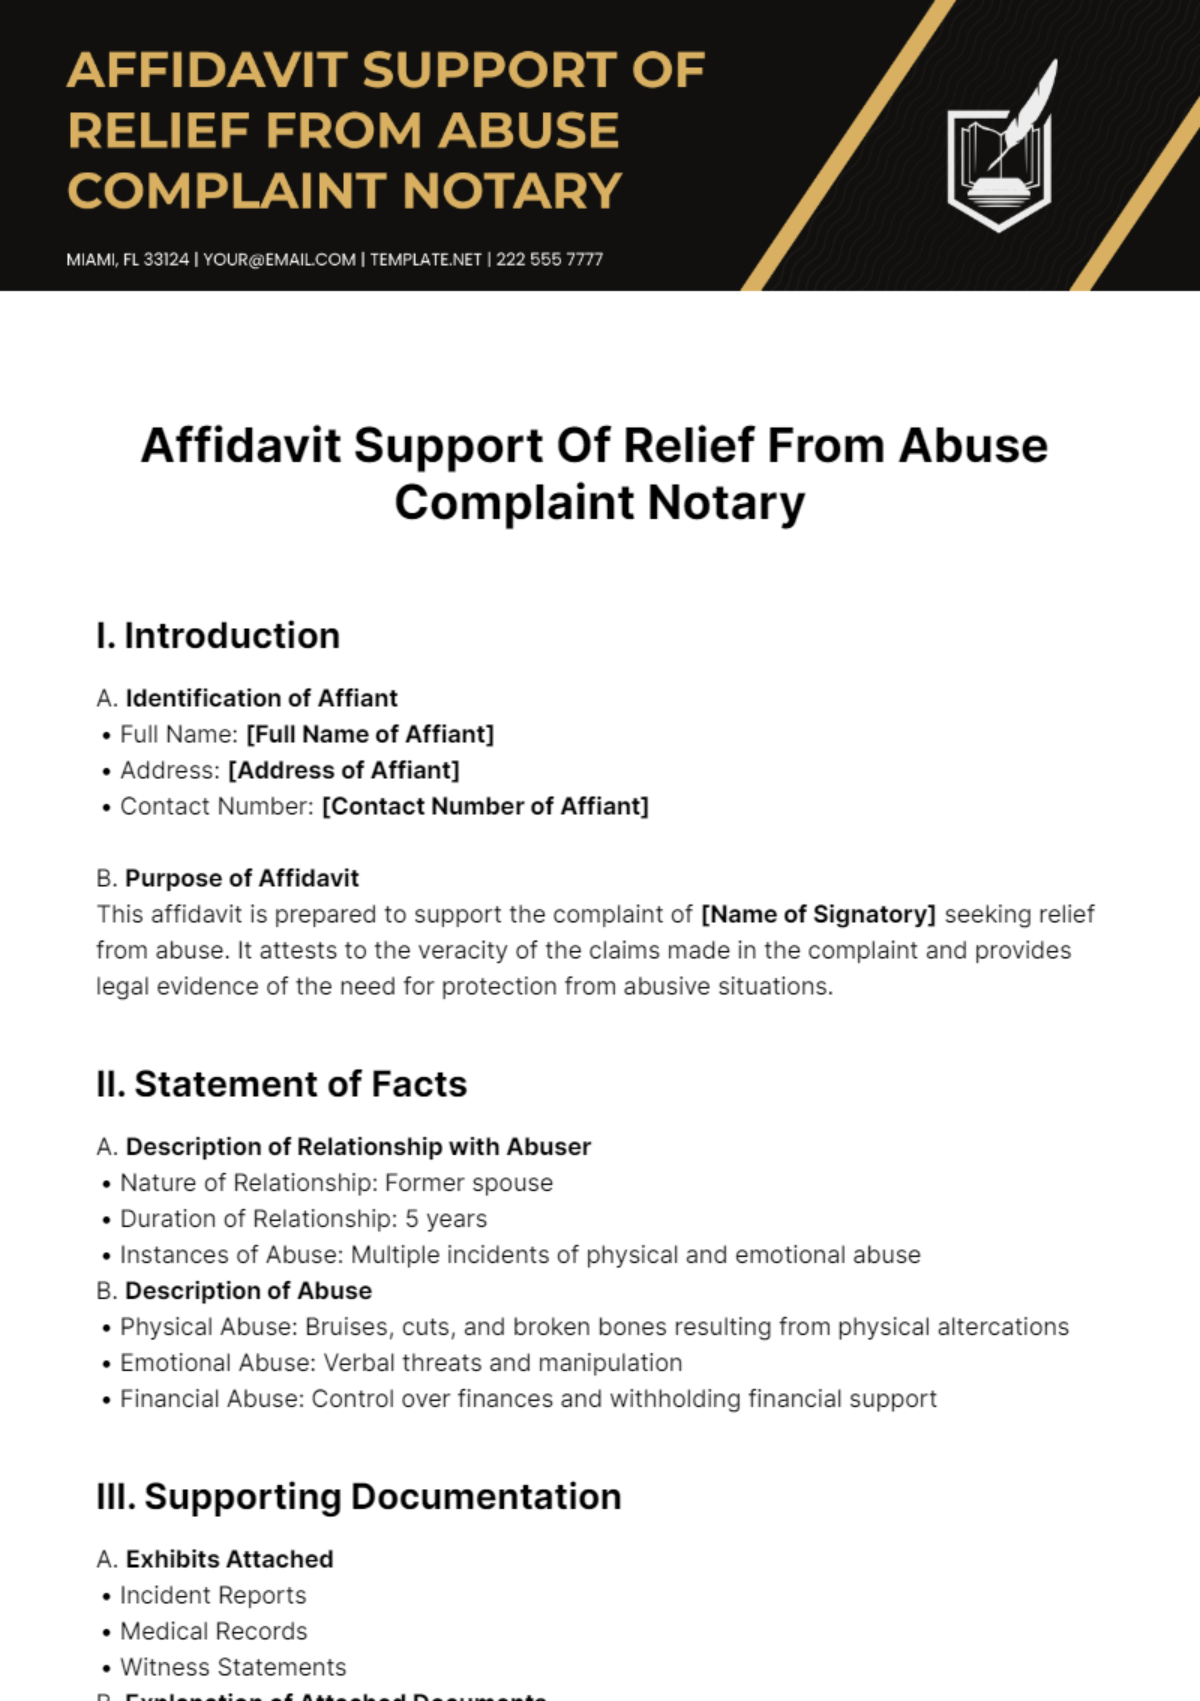 Free Affidavit Support Of Relief From Abuse Complaint Notary Template